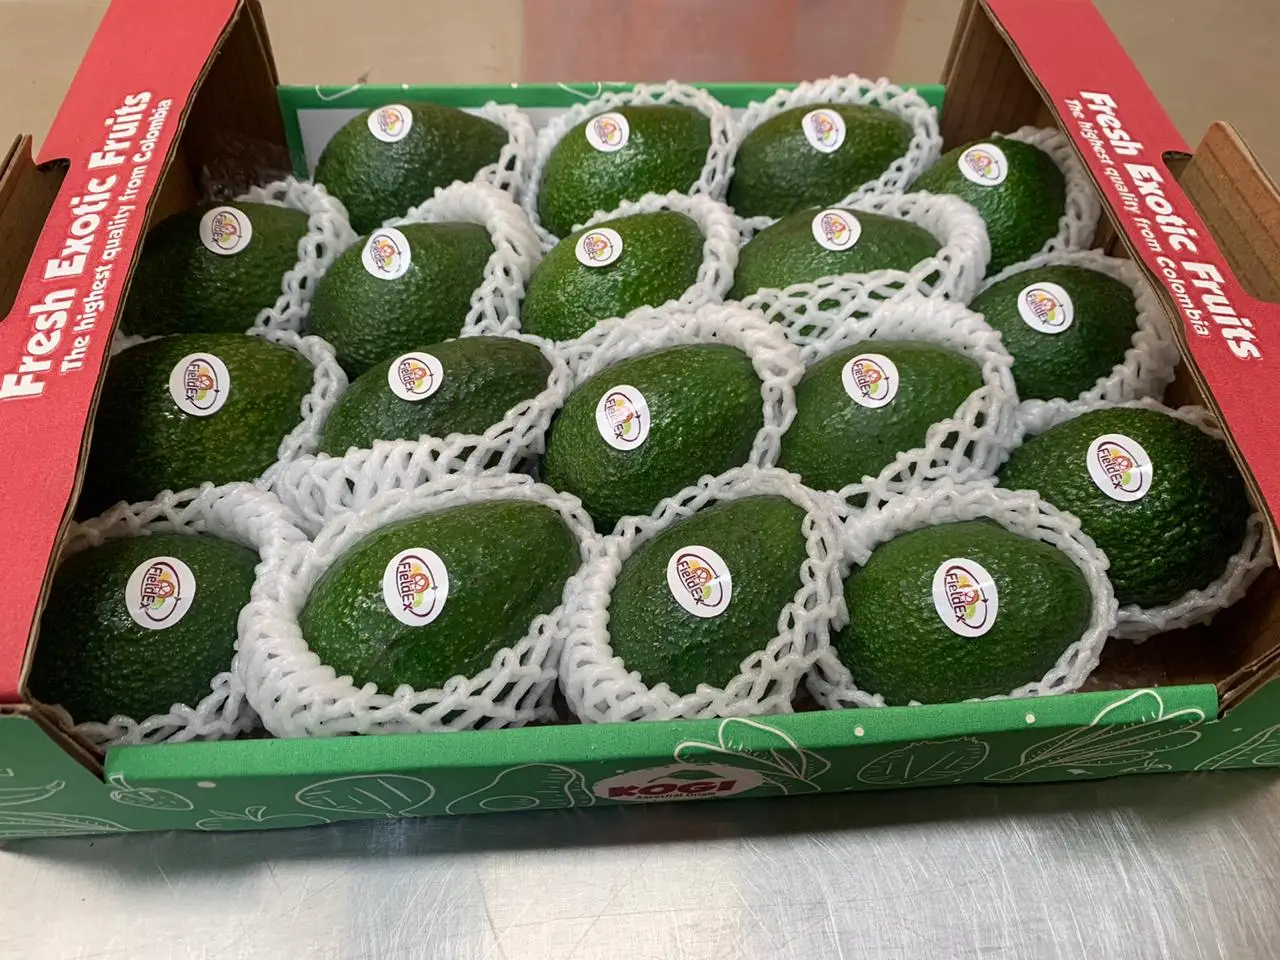 
100% Natural Hass Avocado from Colombian with Wholesale Quantity 